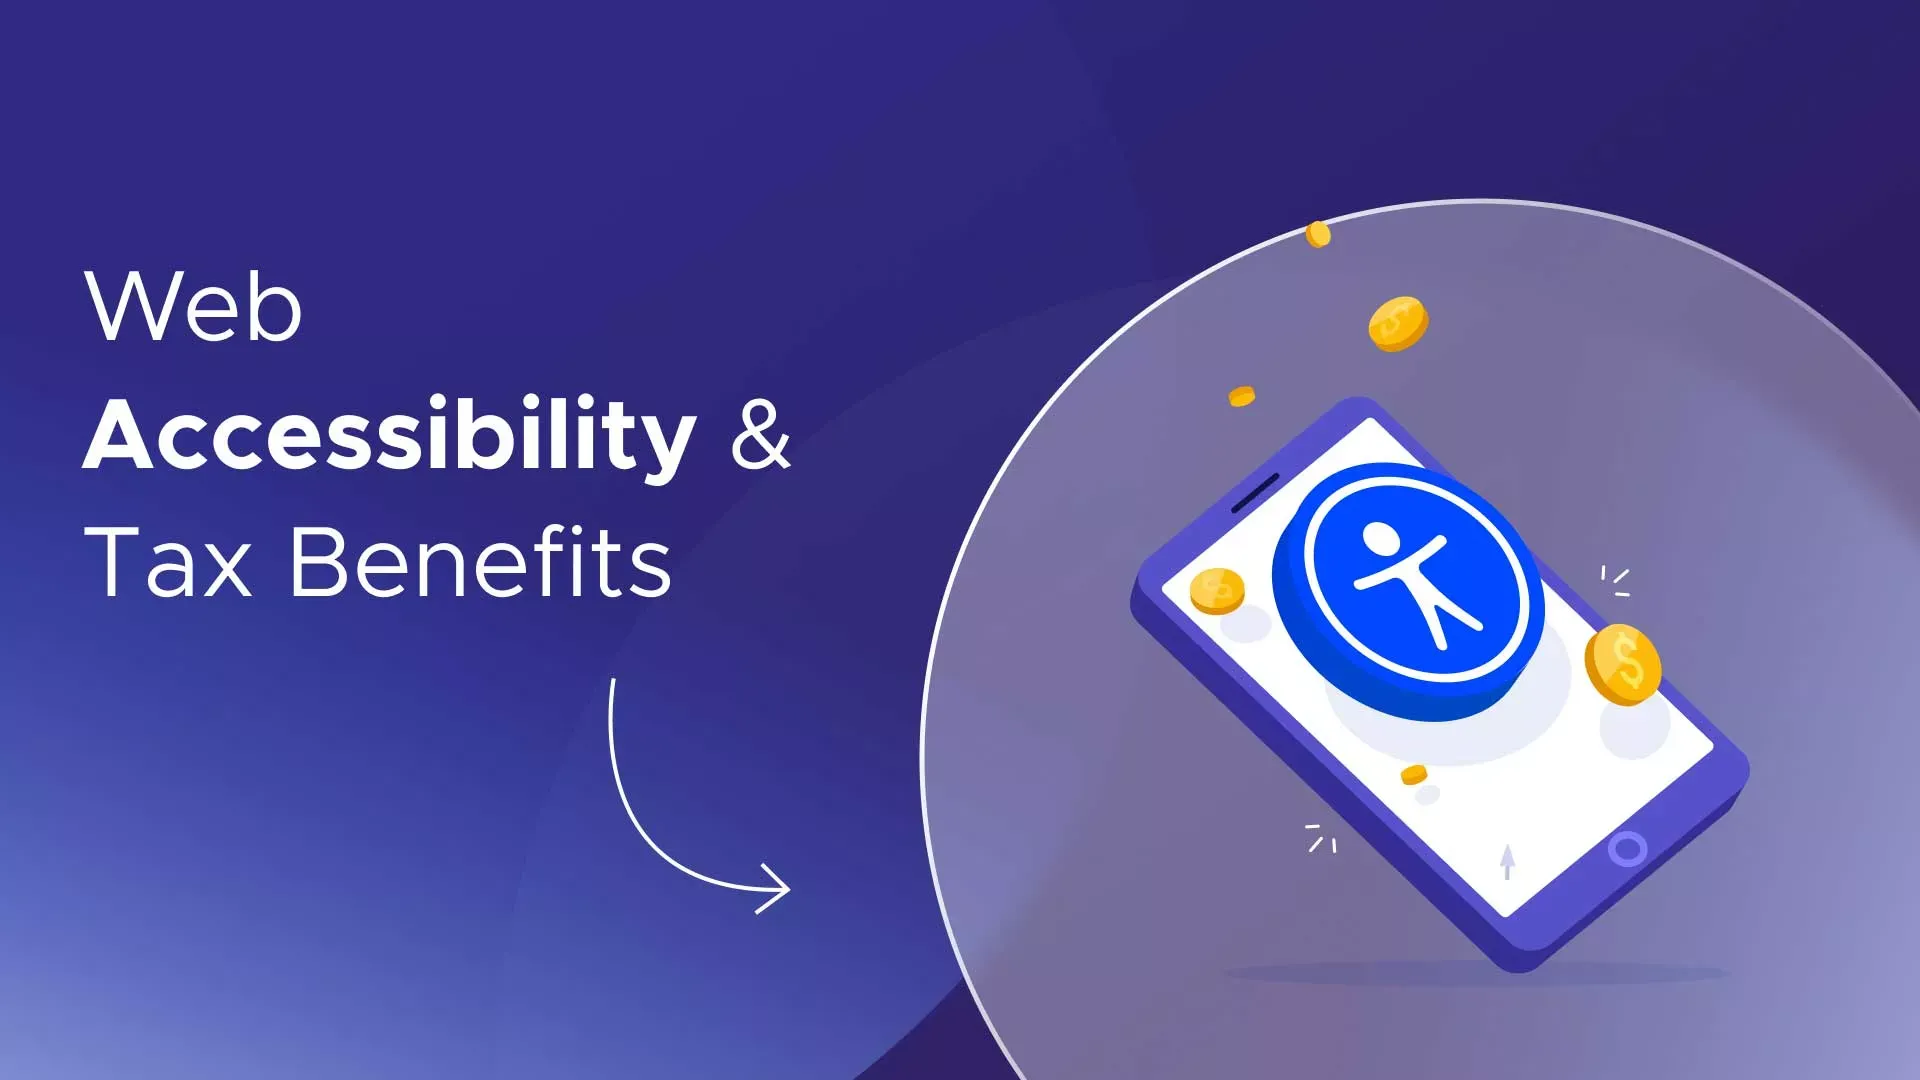 Web Accessibility Tax Benefits Mobile Phone Accessibility Symbol